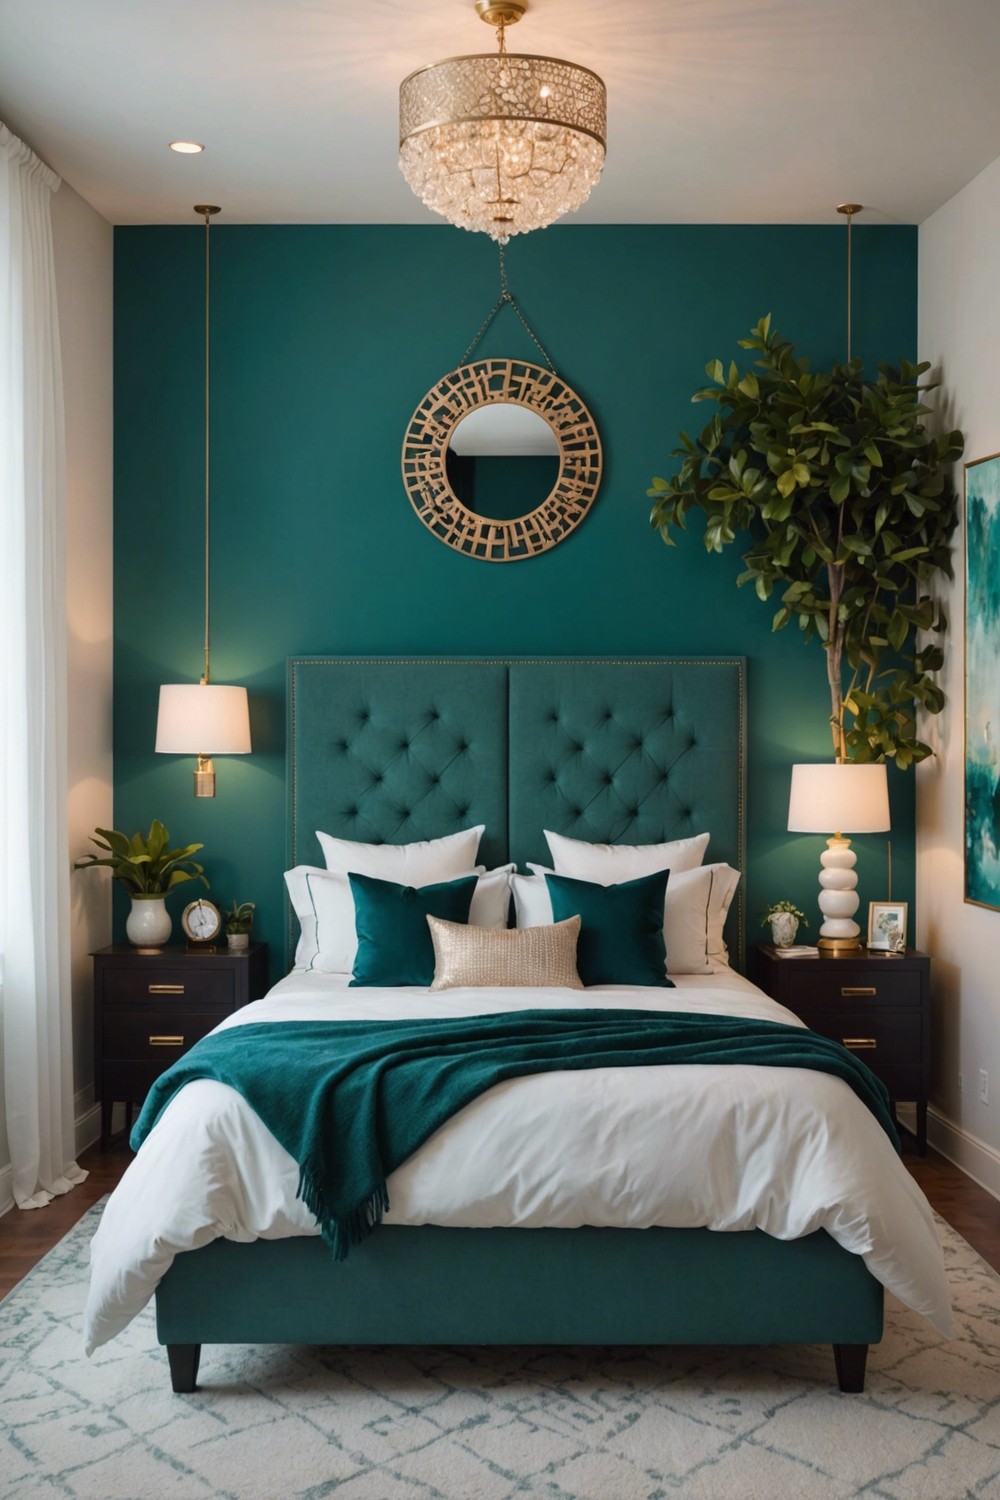 Accent Wall Wonder: Teal Behind the Bed